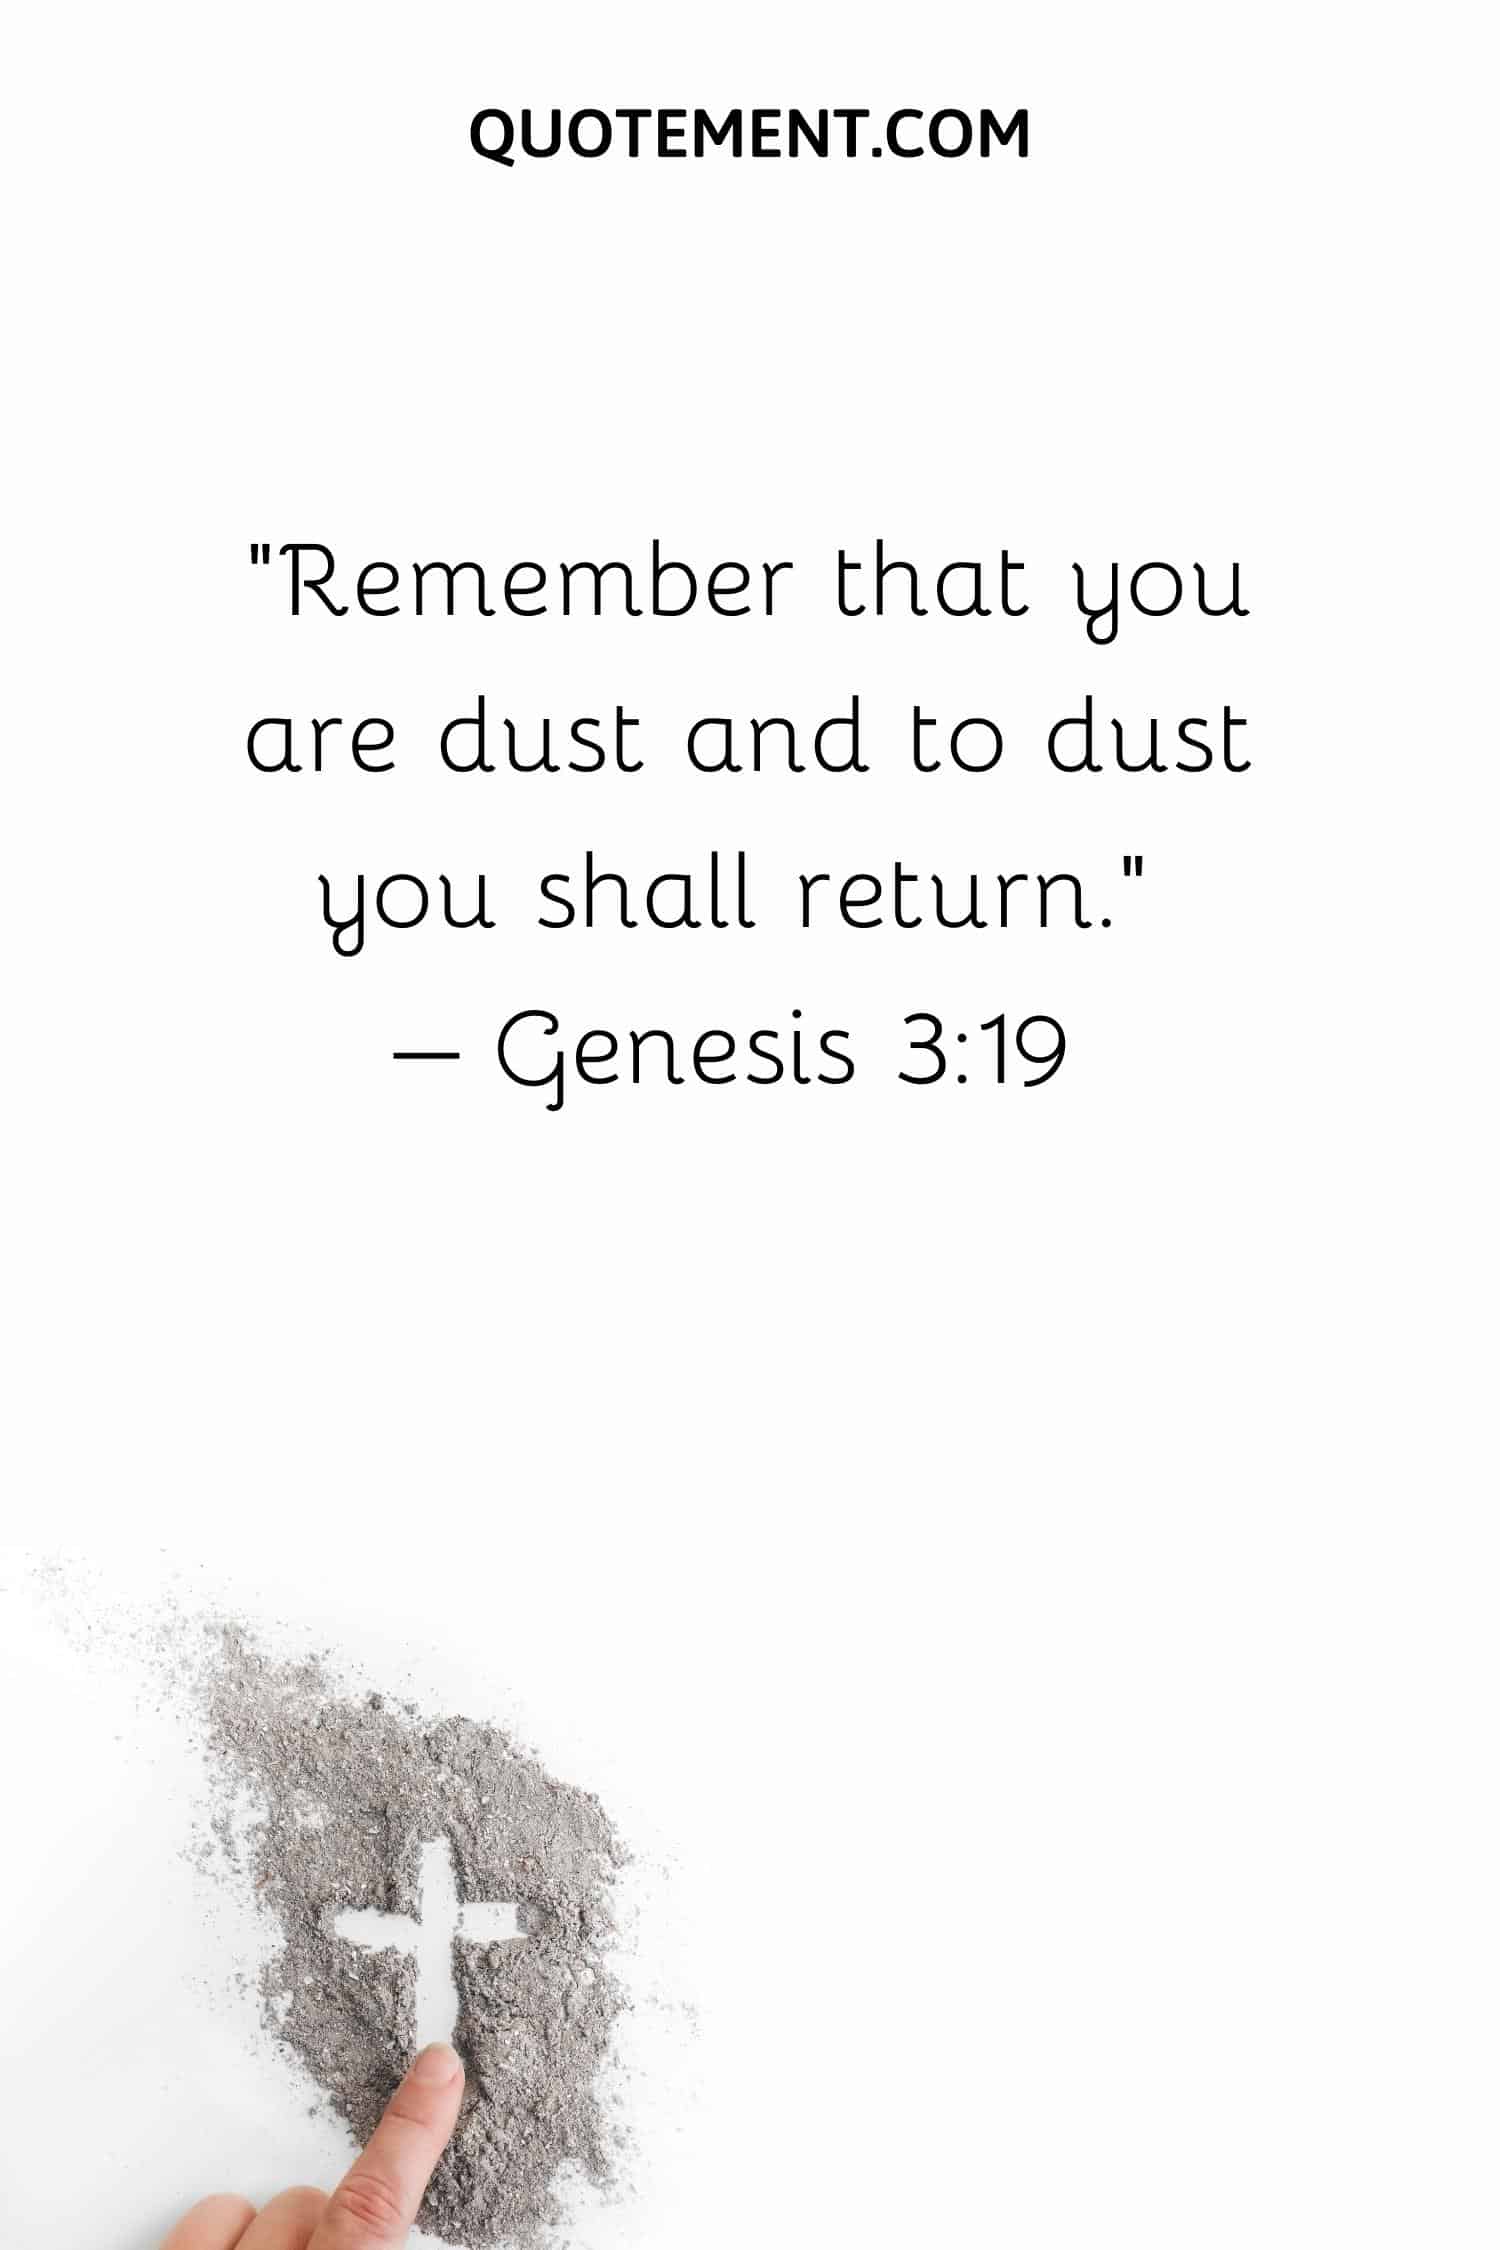 Remember that you are dust and to dust you shall return